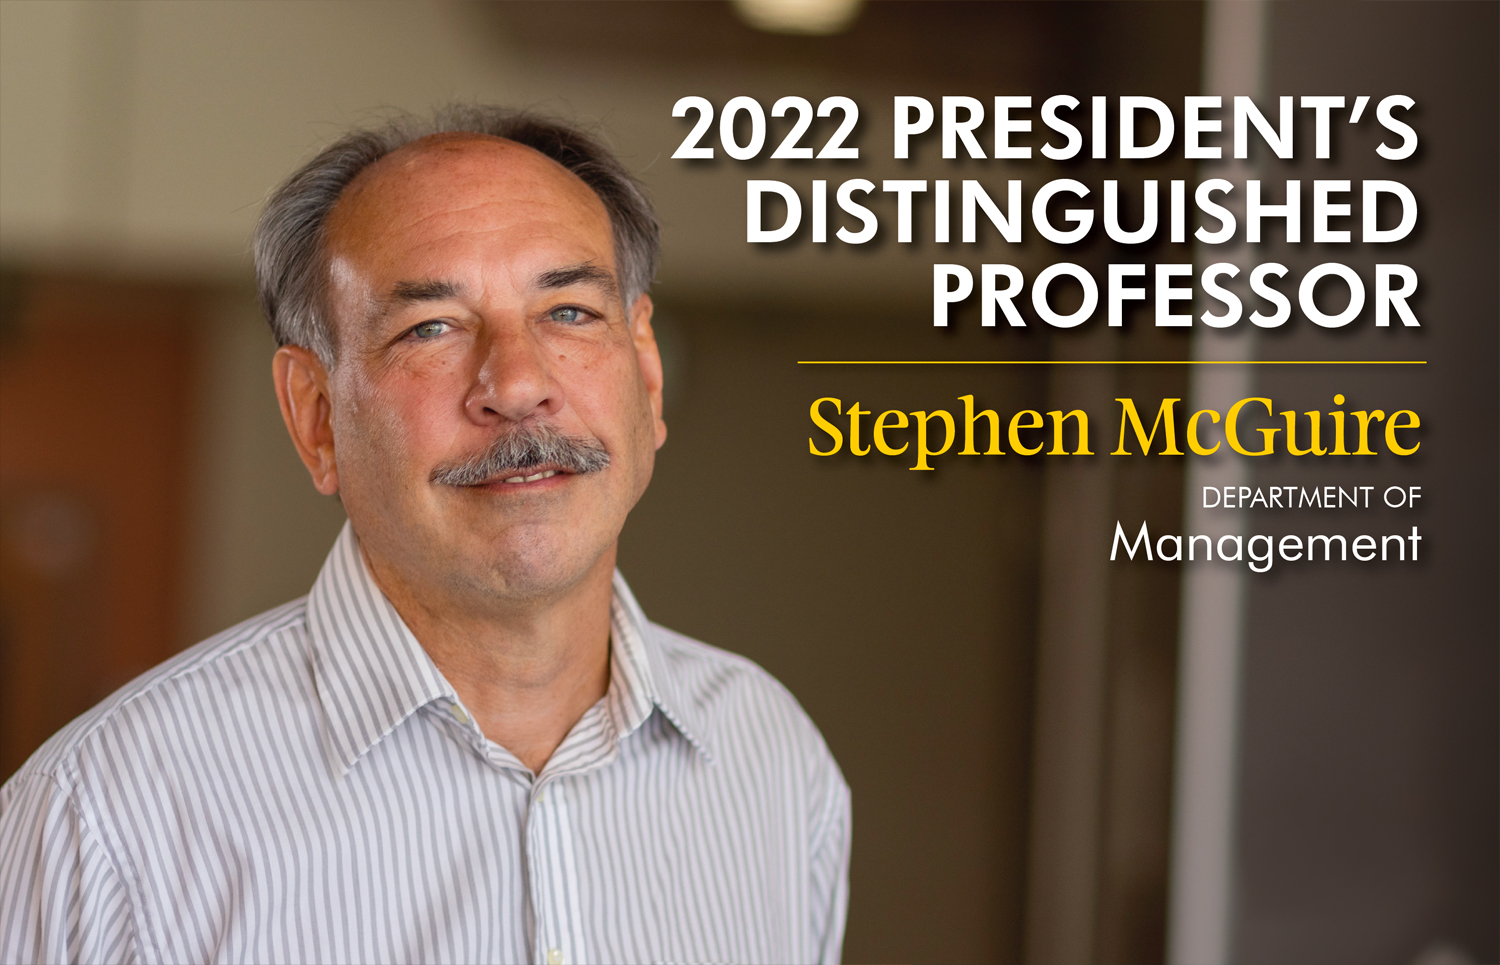 Picture of Stephen McGuire, 2022 President's Distinguished Professor, Department of Management